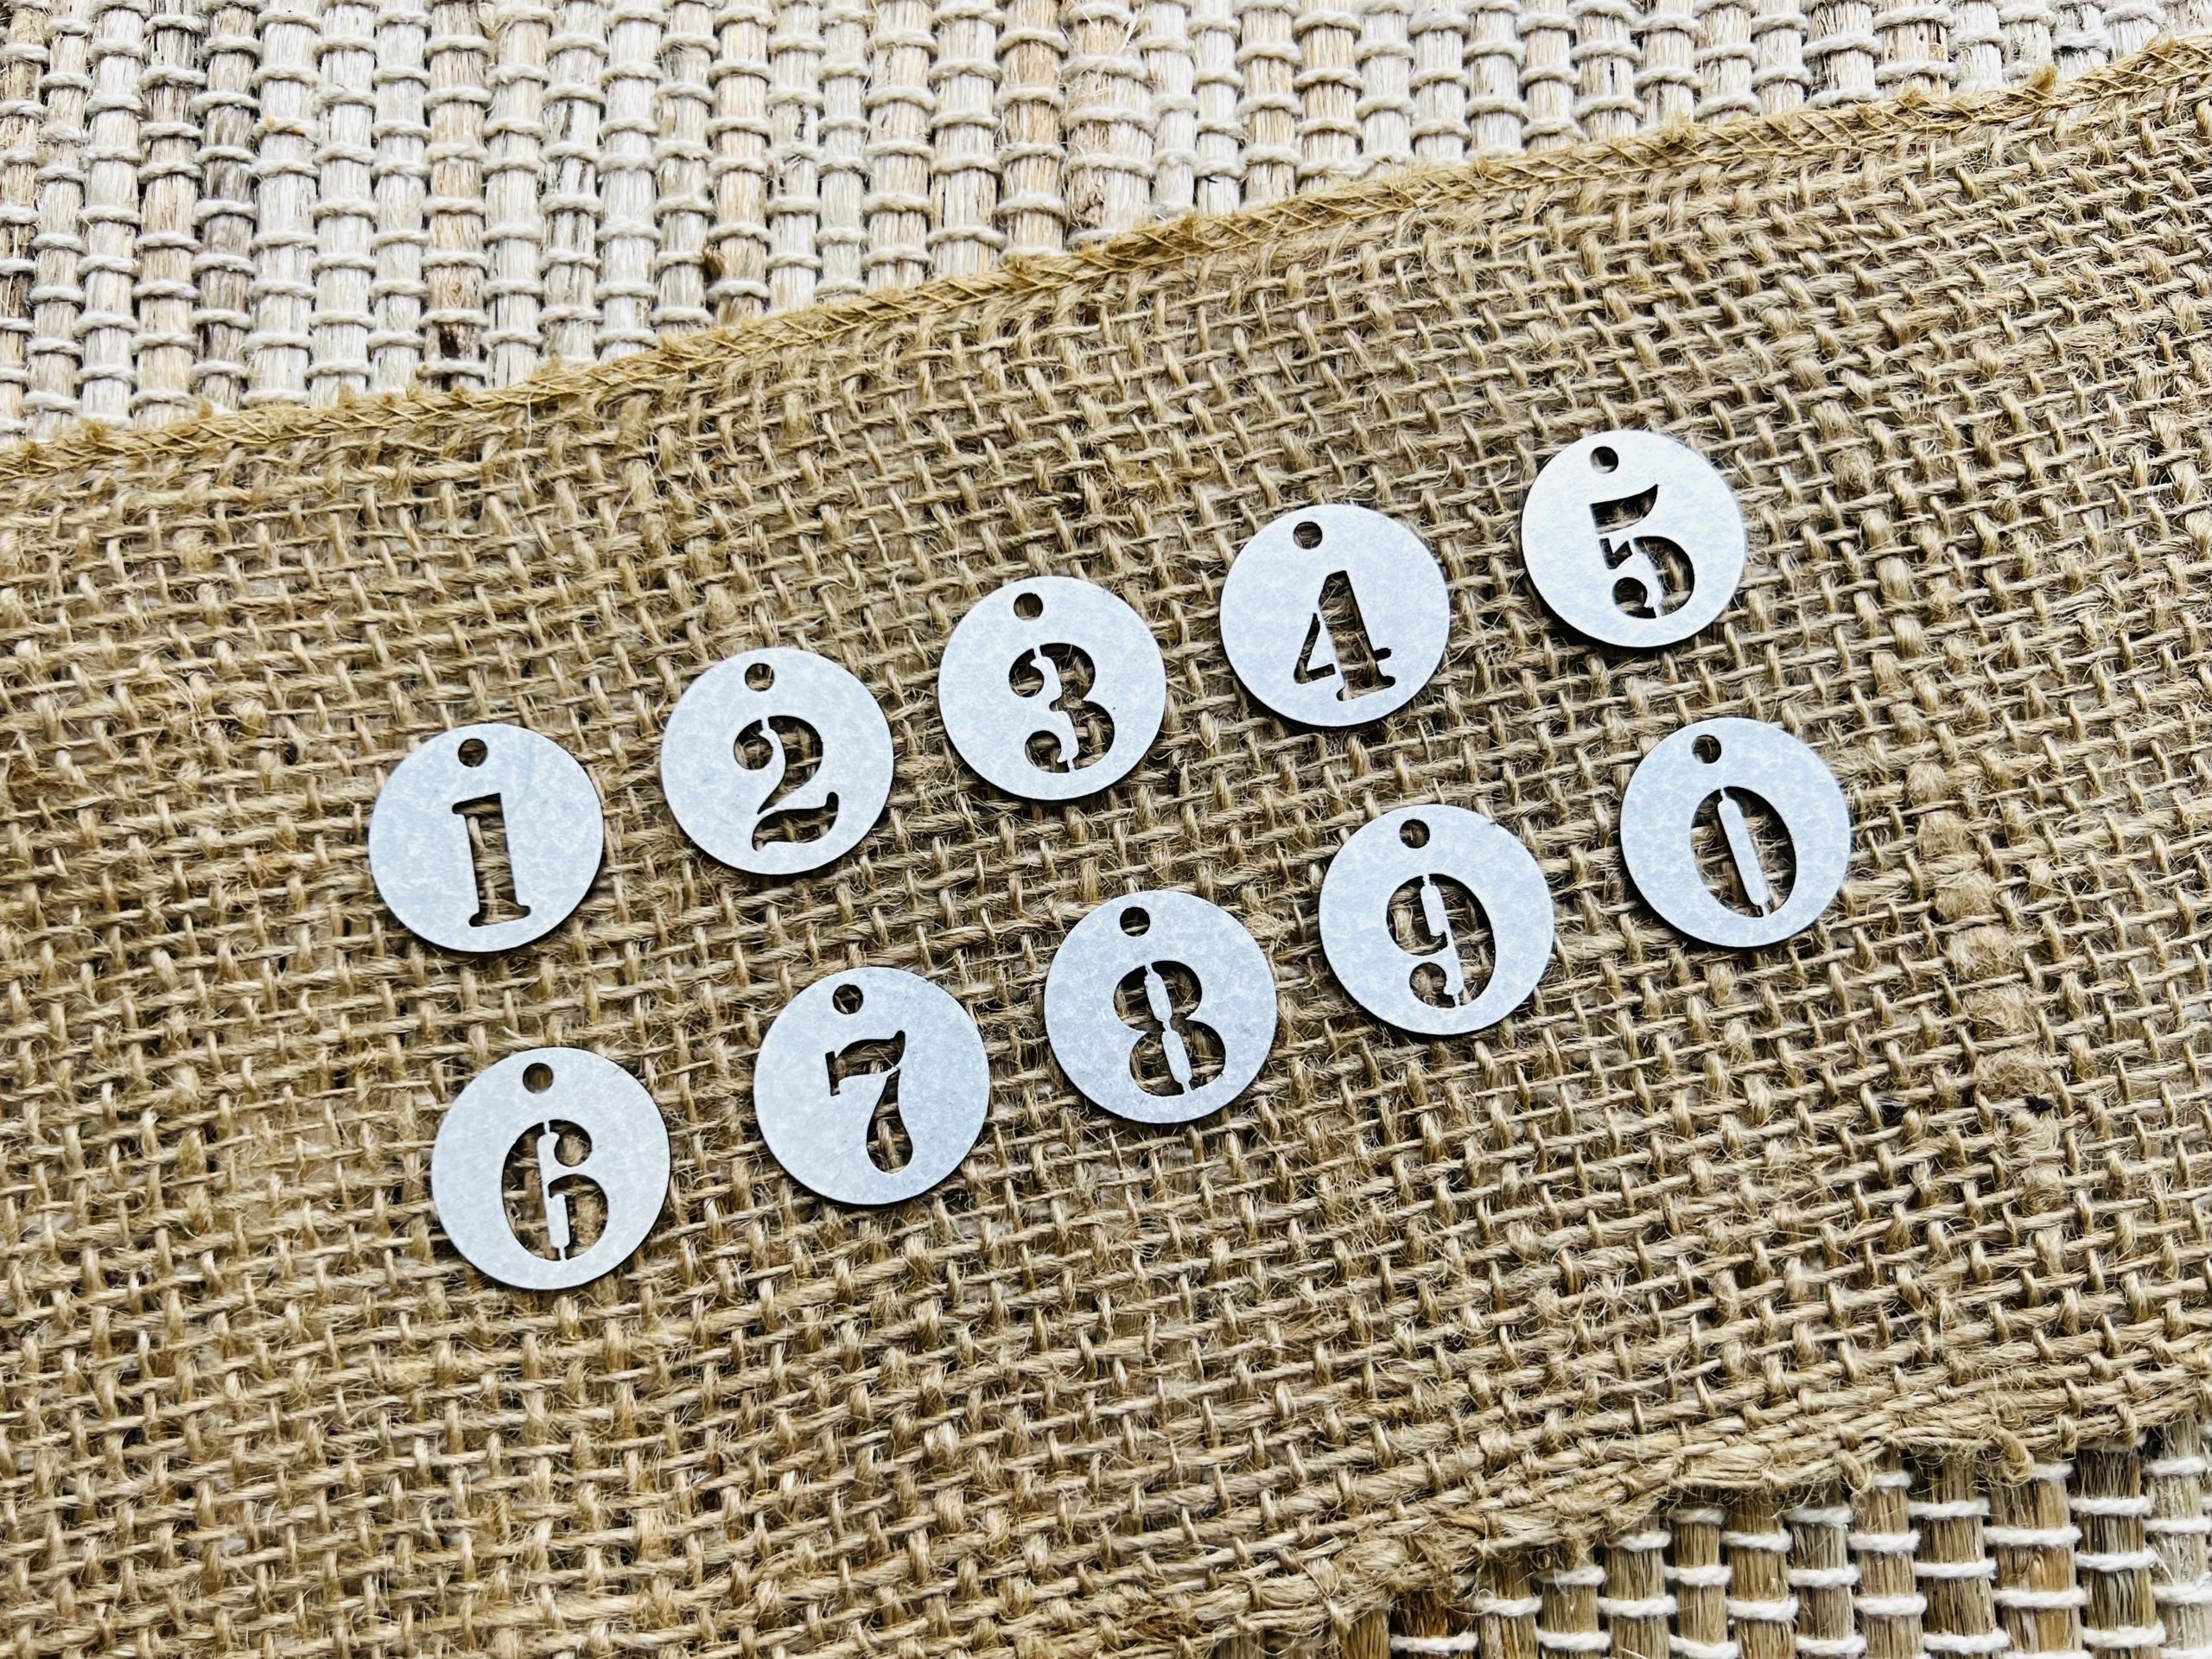 Variety of small number tags to embellish crafts and diy projects